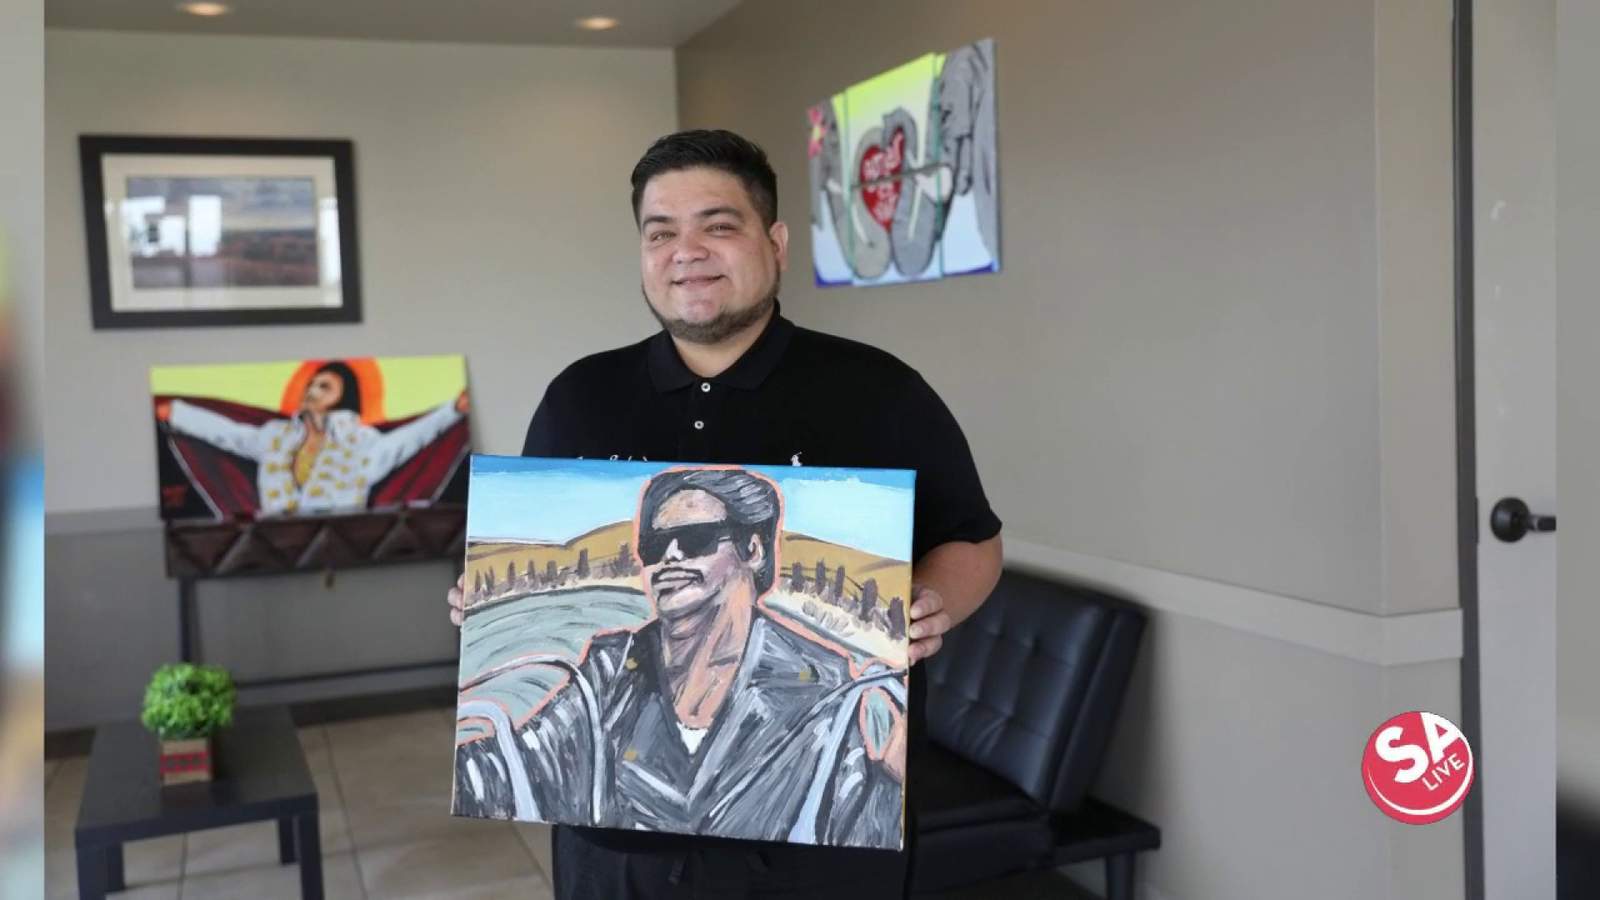 Real San Antonian: Southside doctor uses his art to help pay for the uninsured